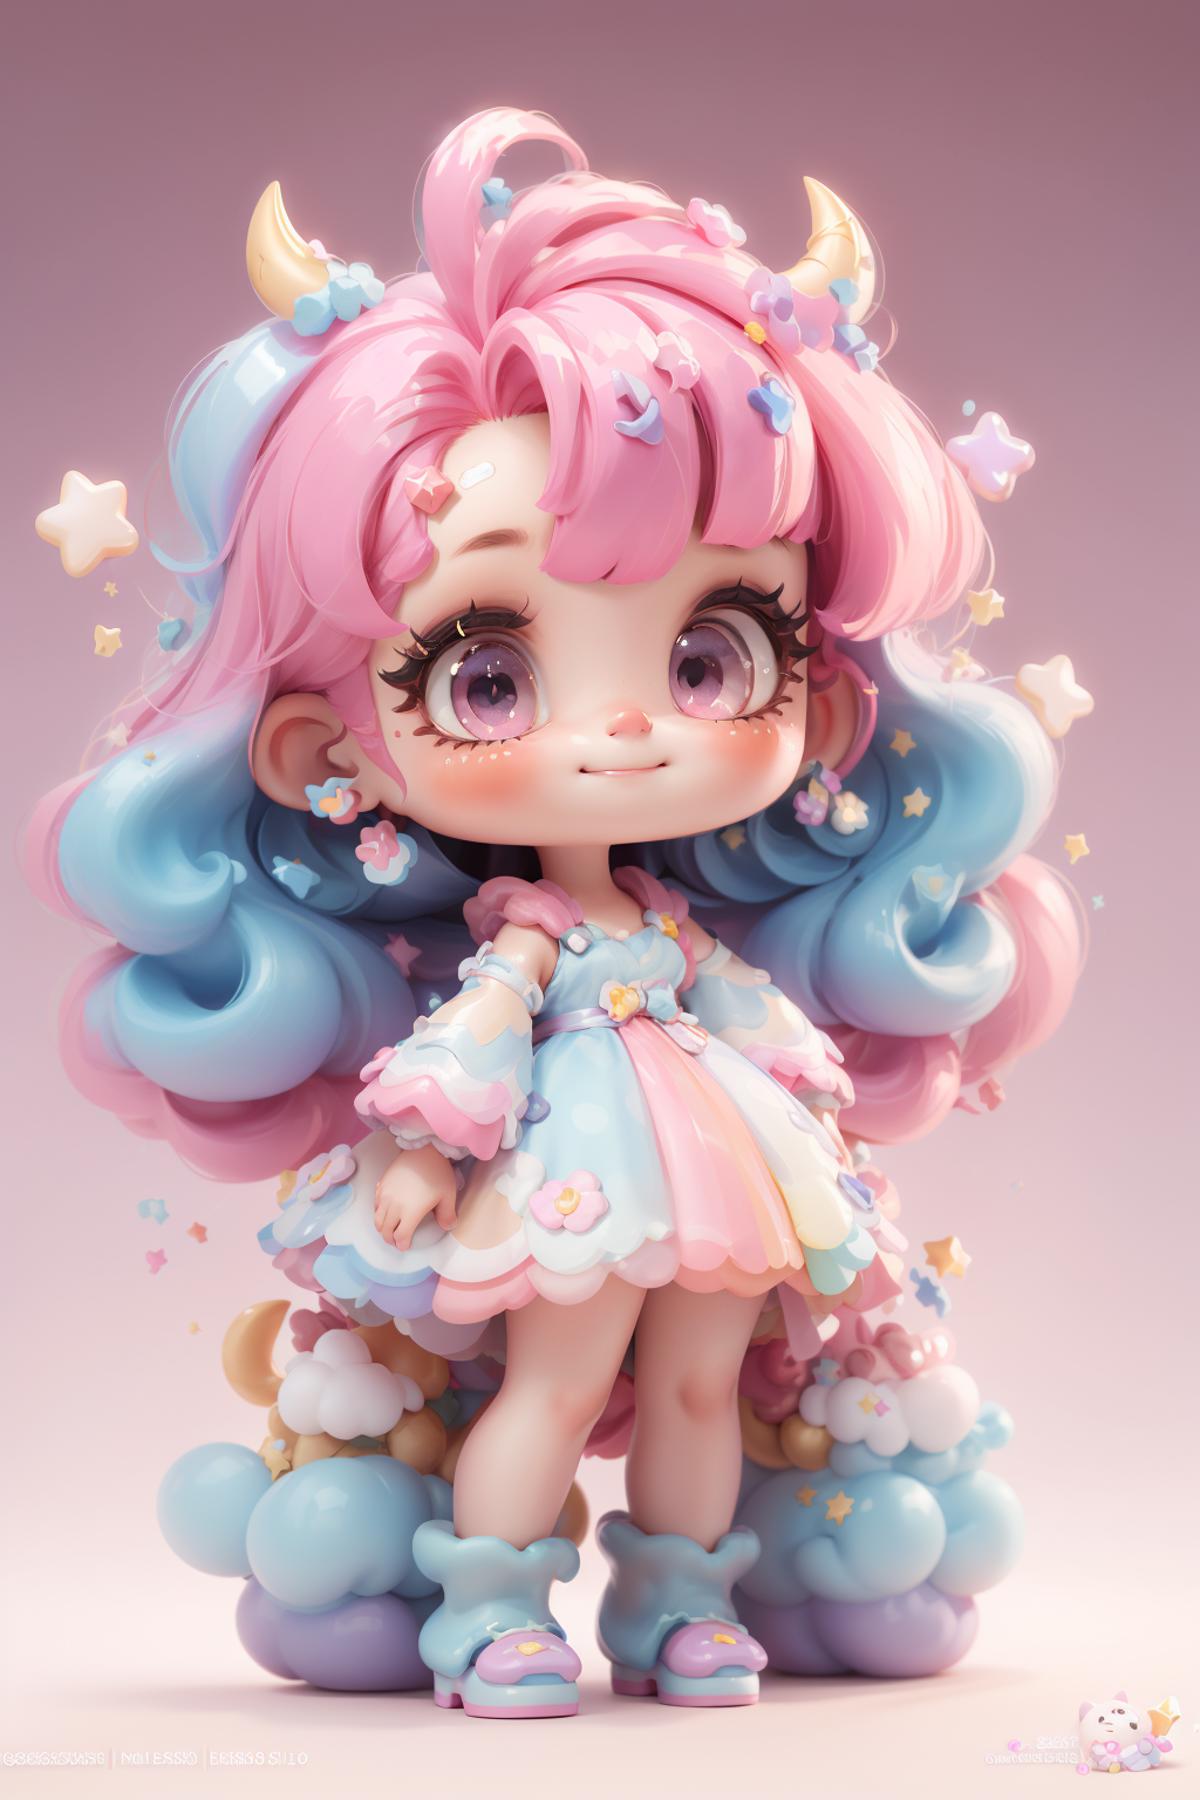 A pink and blue doll with stars in her hair, a blue ribbon, and a dress.